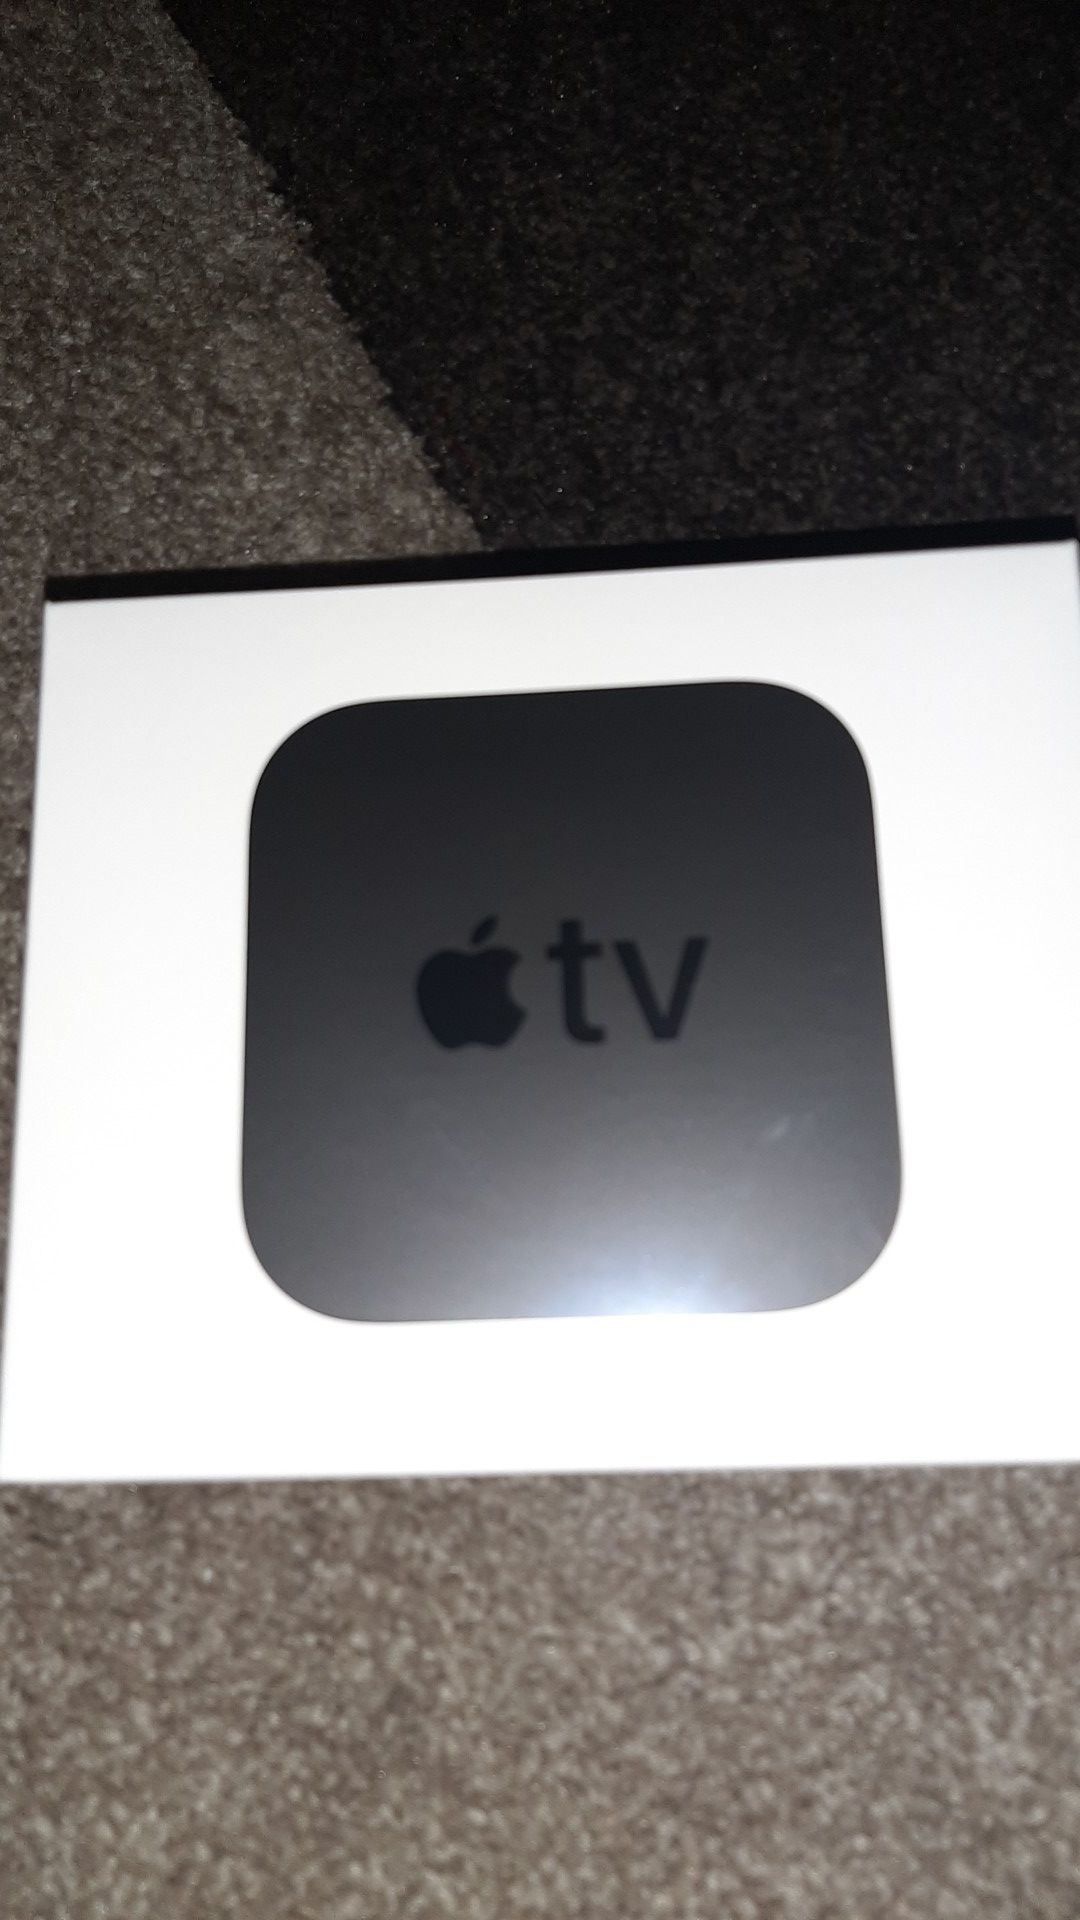 Apple TV new unwrapped